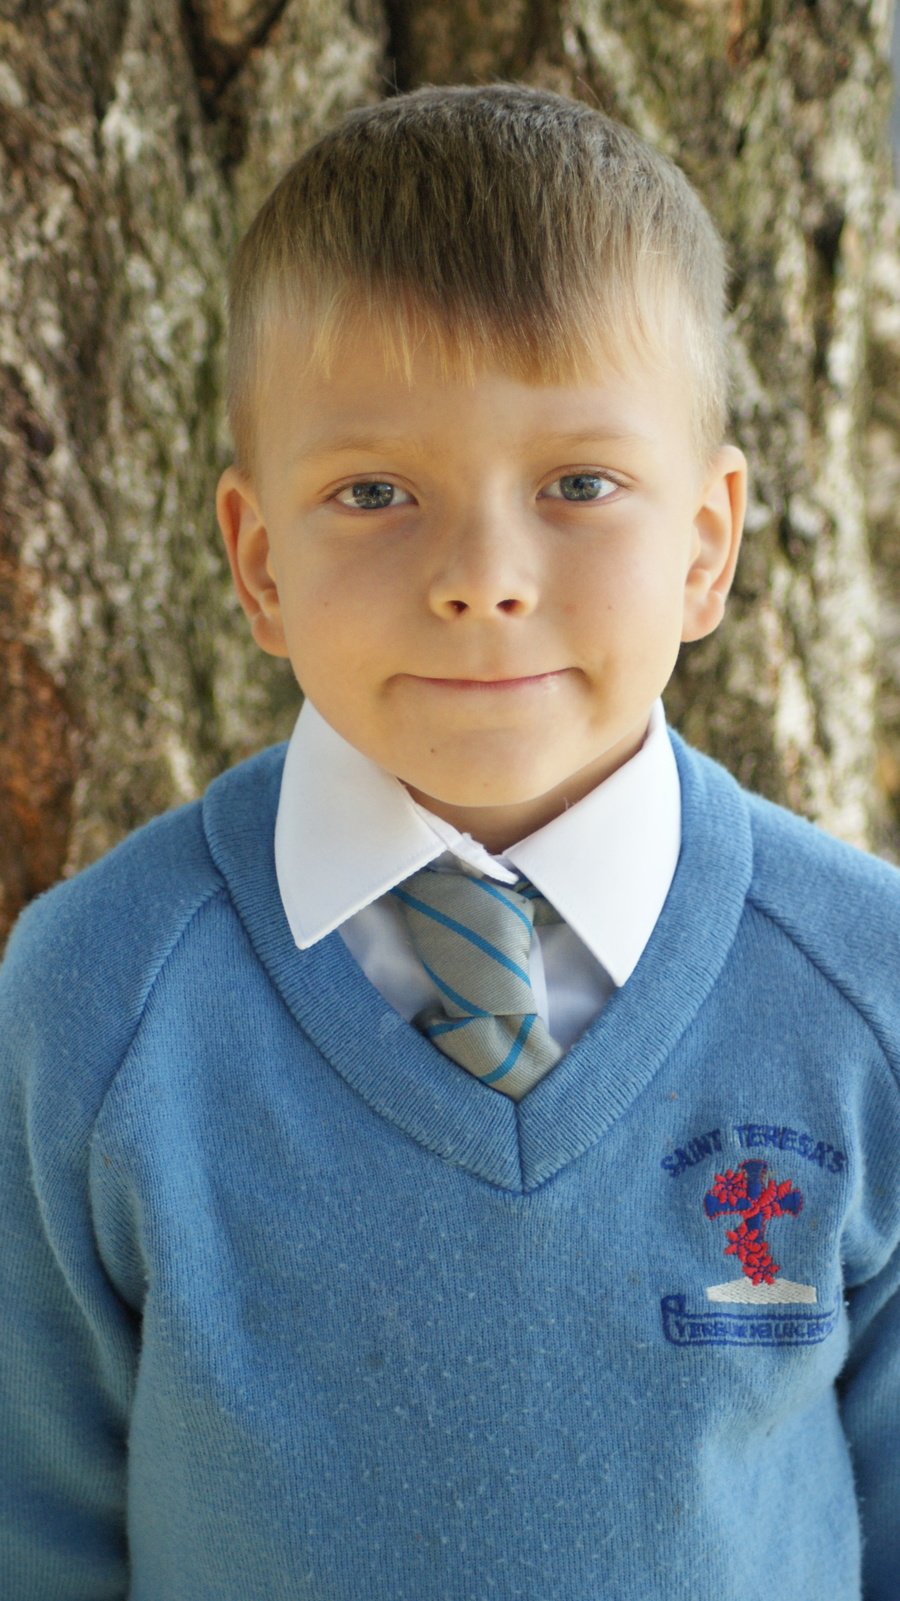 Shirt, Tie and Branded Jumper